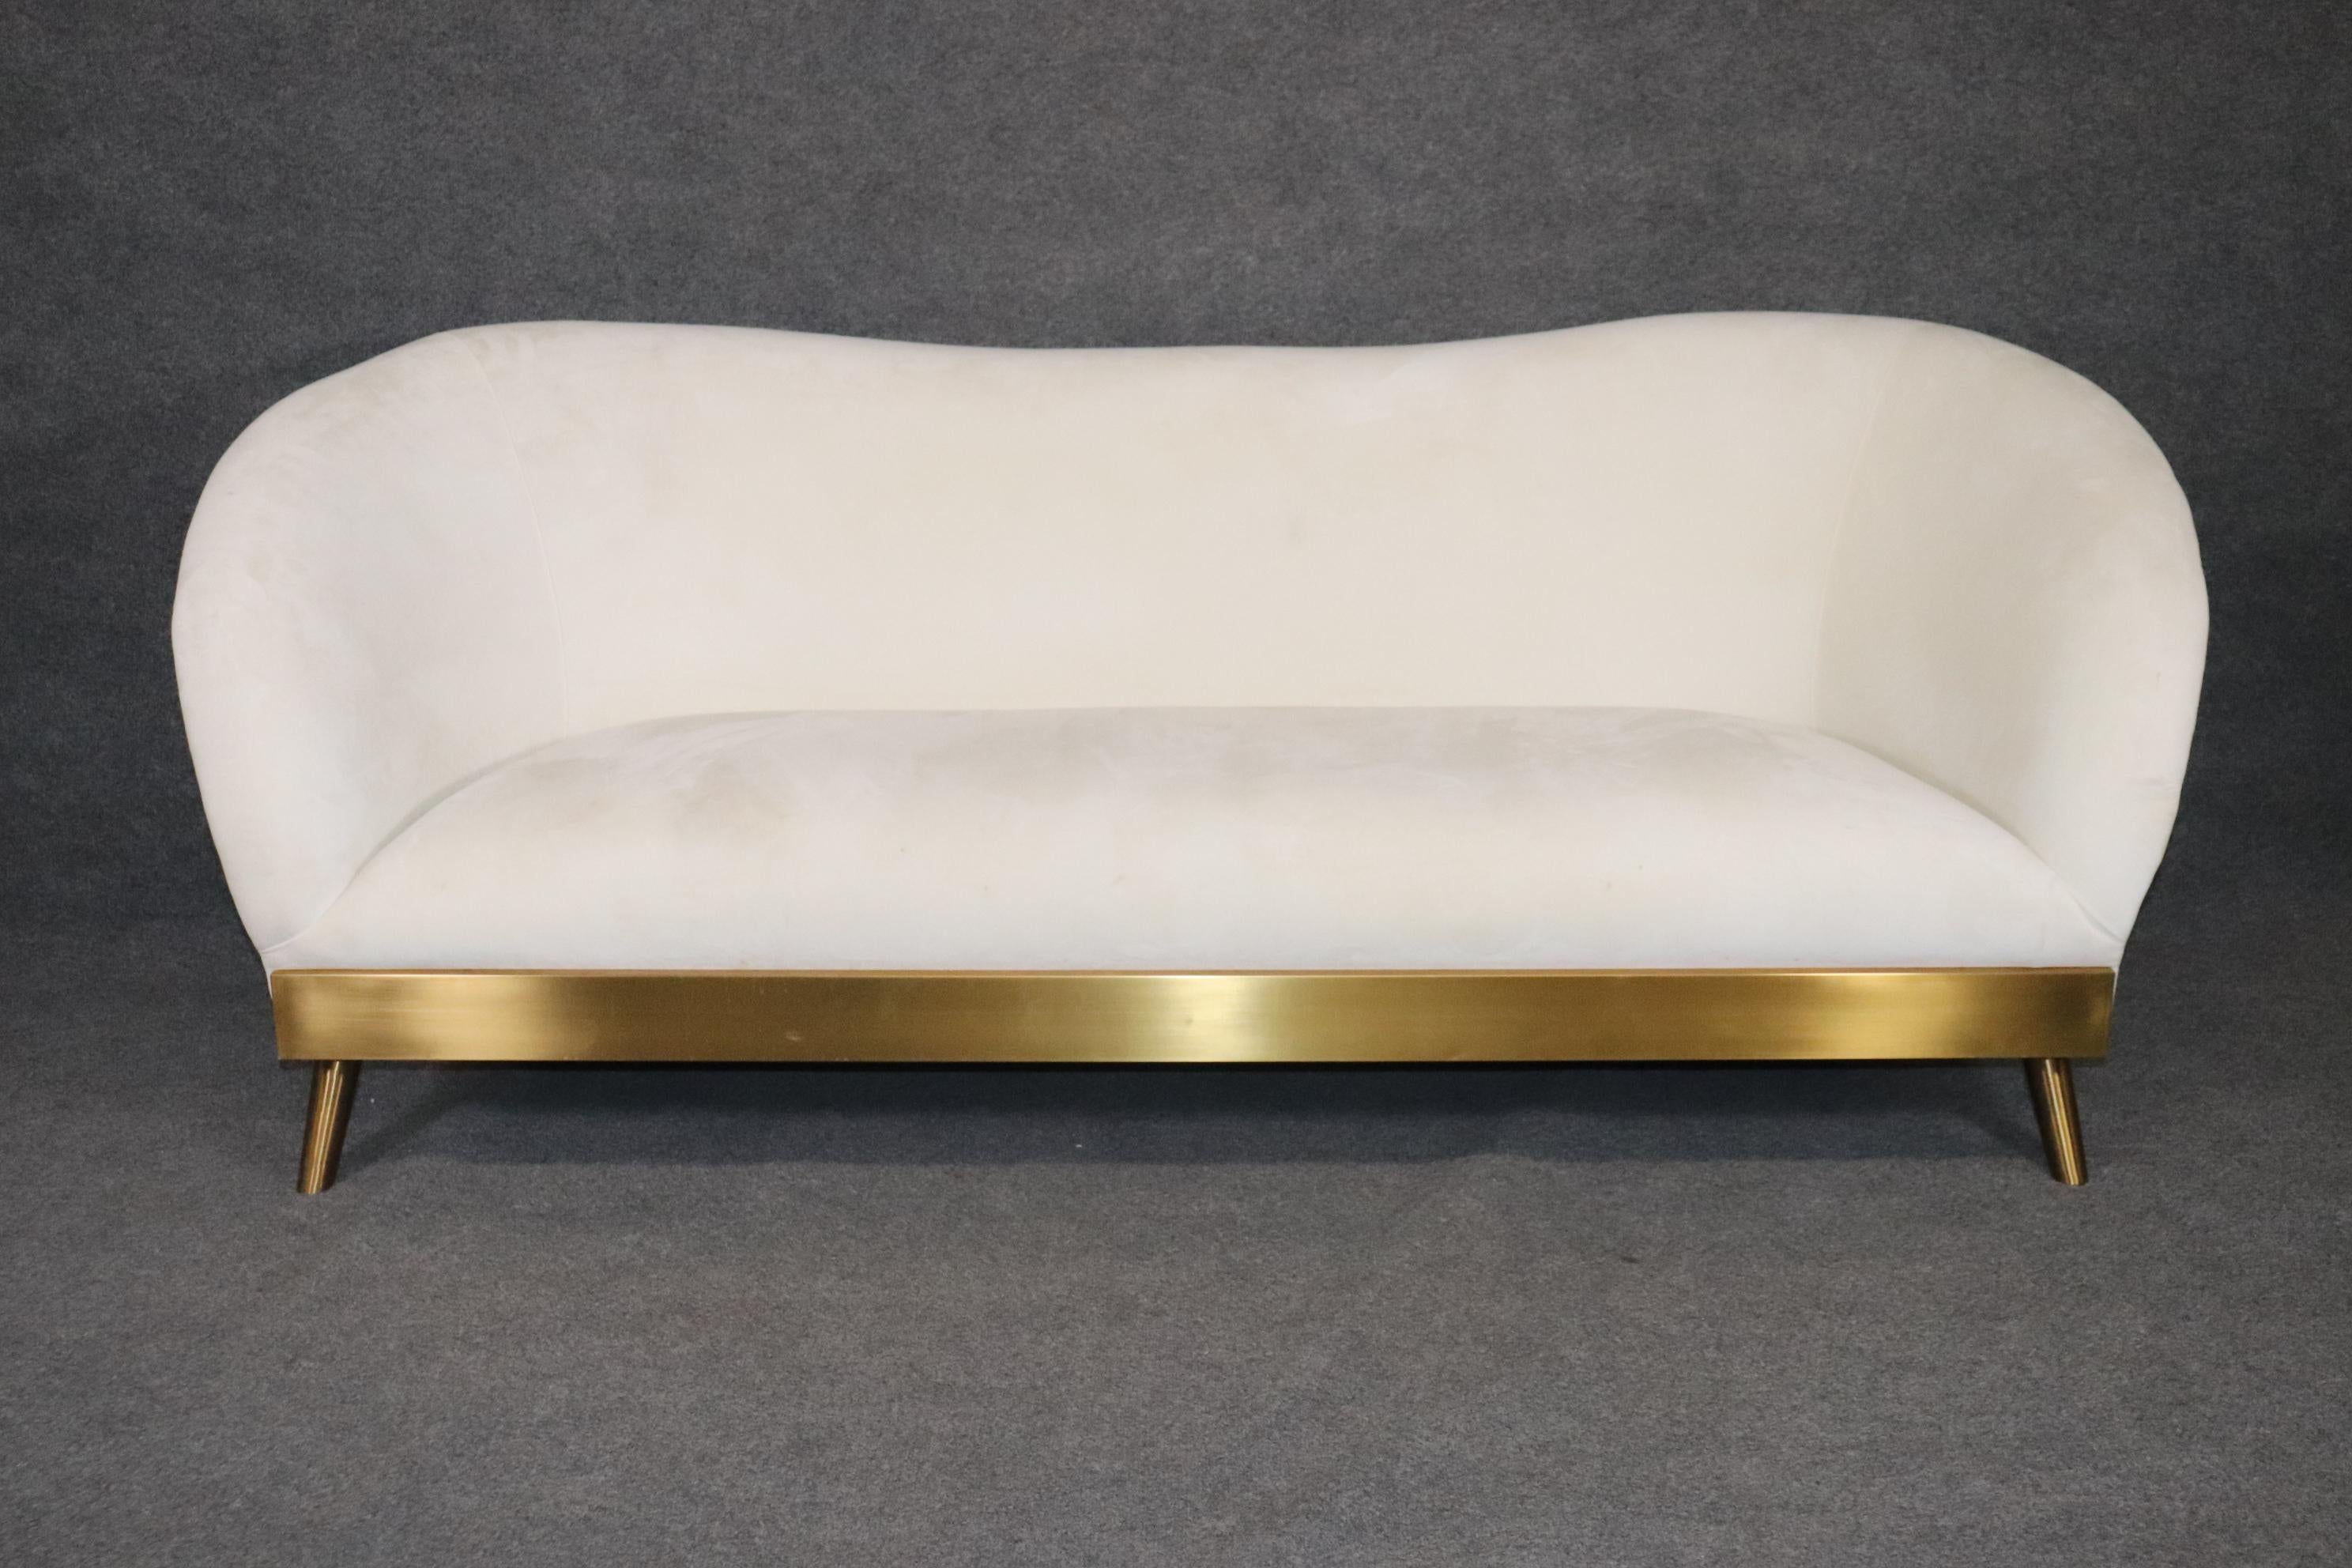 This is a beautiful and very chic mid century modern style 2000s era sofa with brass elements. The sofa is upholstered in what I believe is a chenile and very very soft and almost as soft as rabbit fur. The upholstery is used so there are some minor